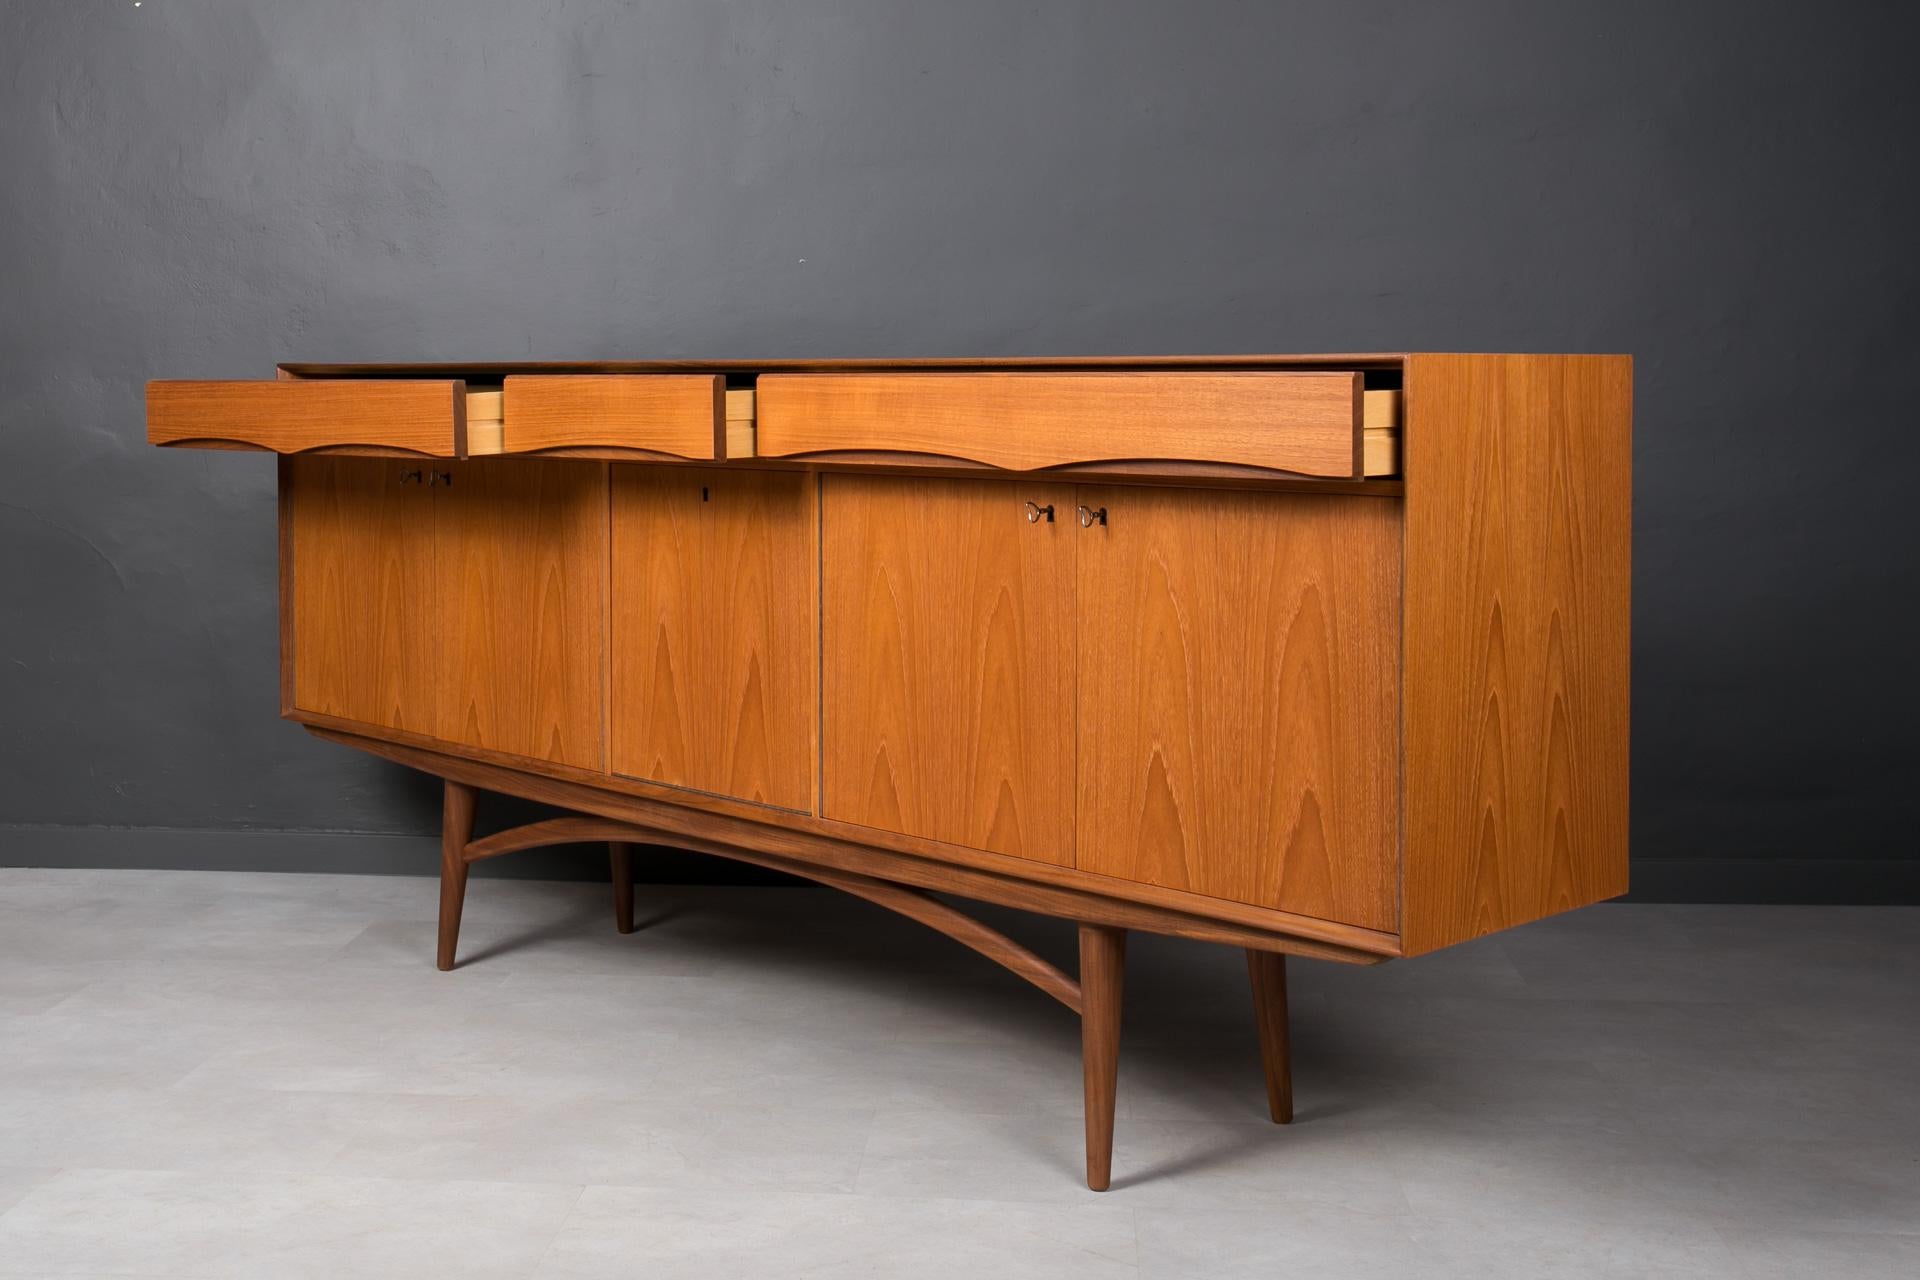 Midcentury Teak Sideboard, Norway, 1960s, Gustav Bahus Style In Good Condition For Sale In Wrocław, Poland